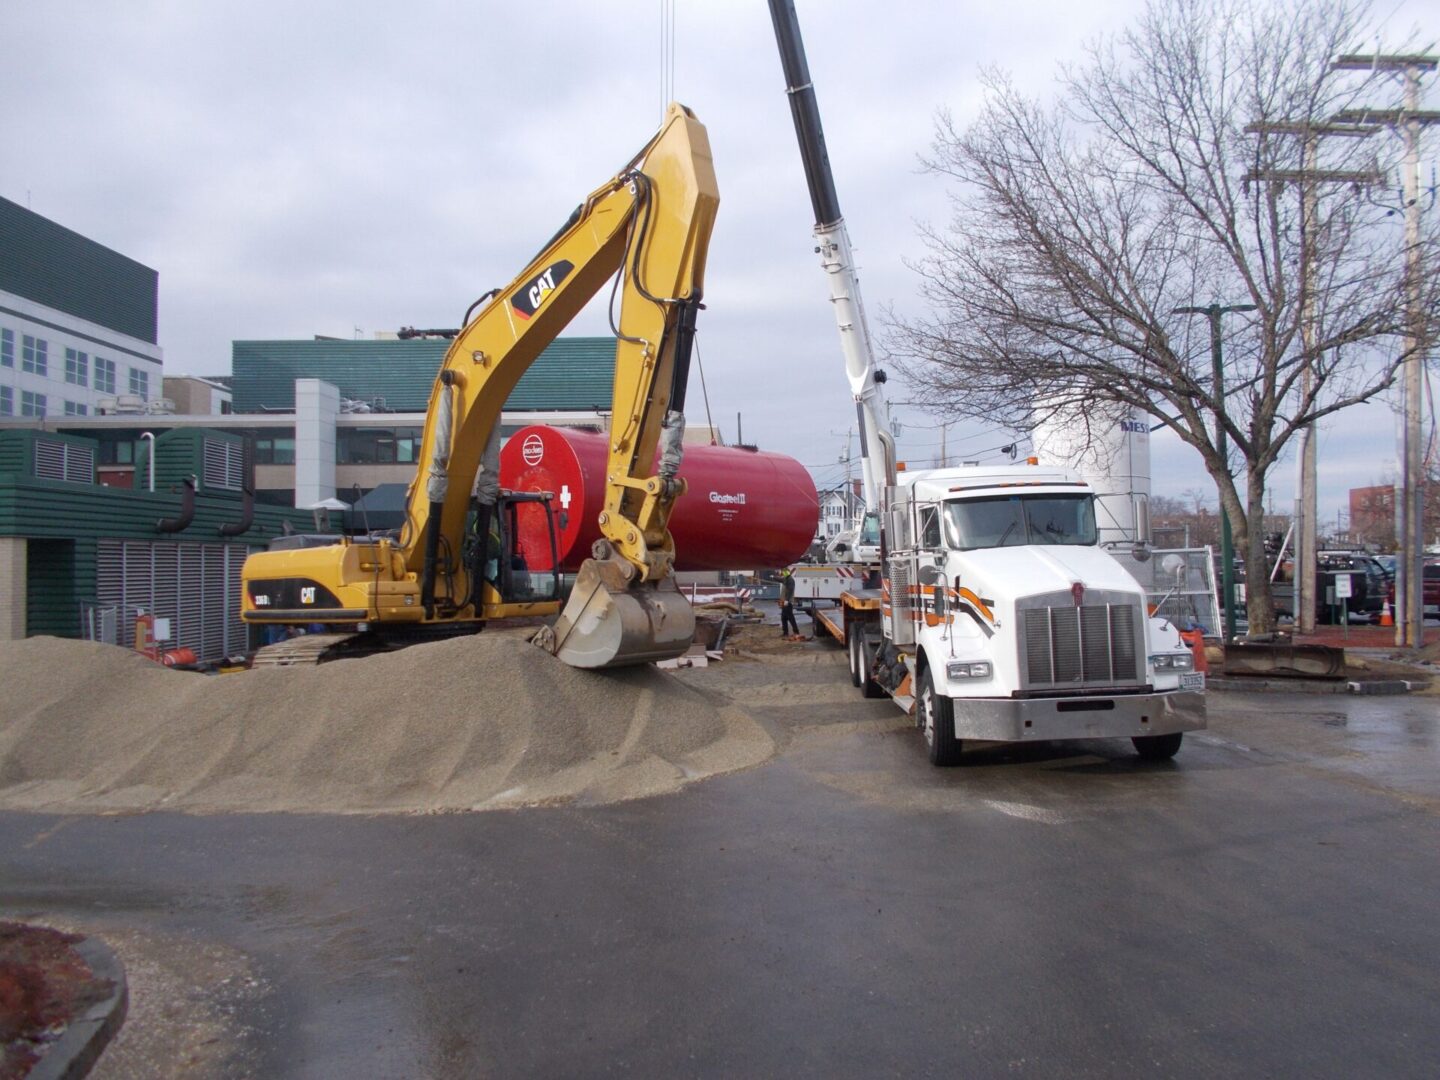 A large truck is being used to move concrete.